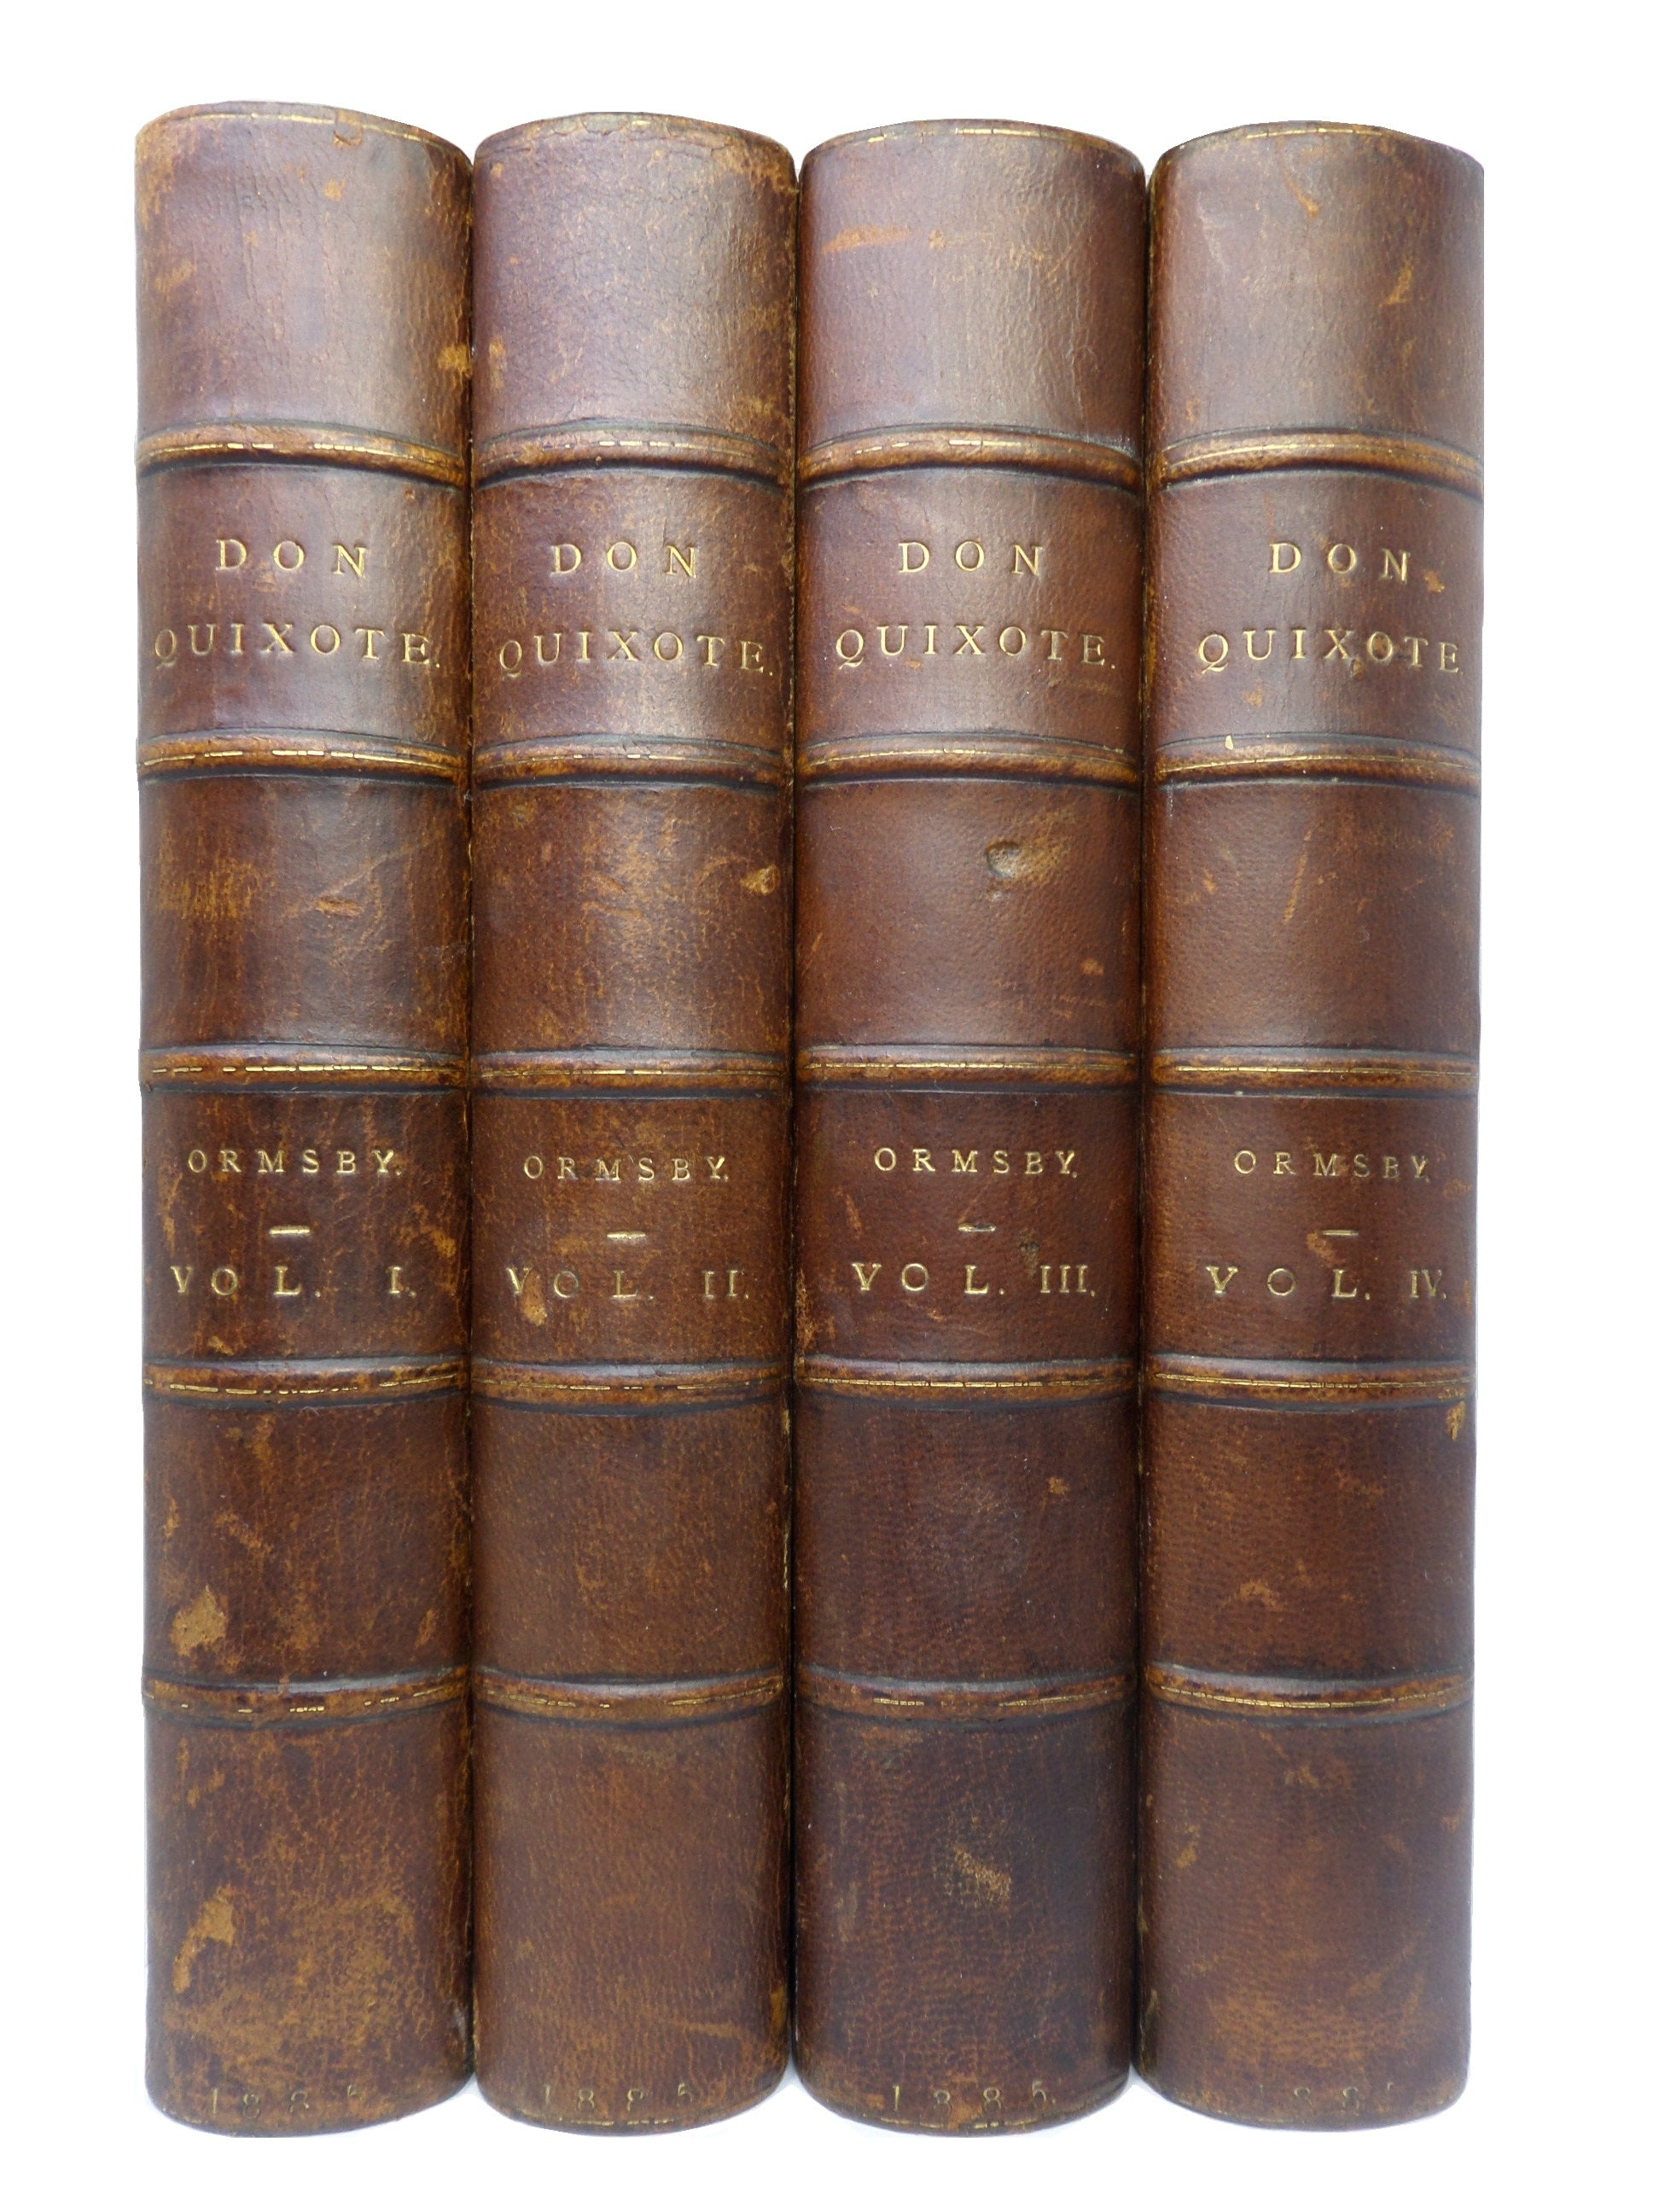 DON QUIXOTE BY CERVANTES 1885 IN FOUR LEATHER-BOUND VOLUMES BY DENNY